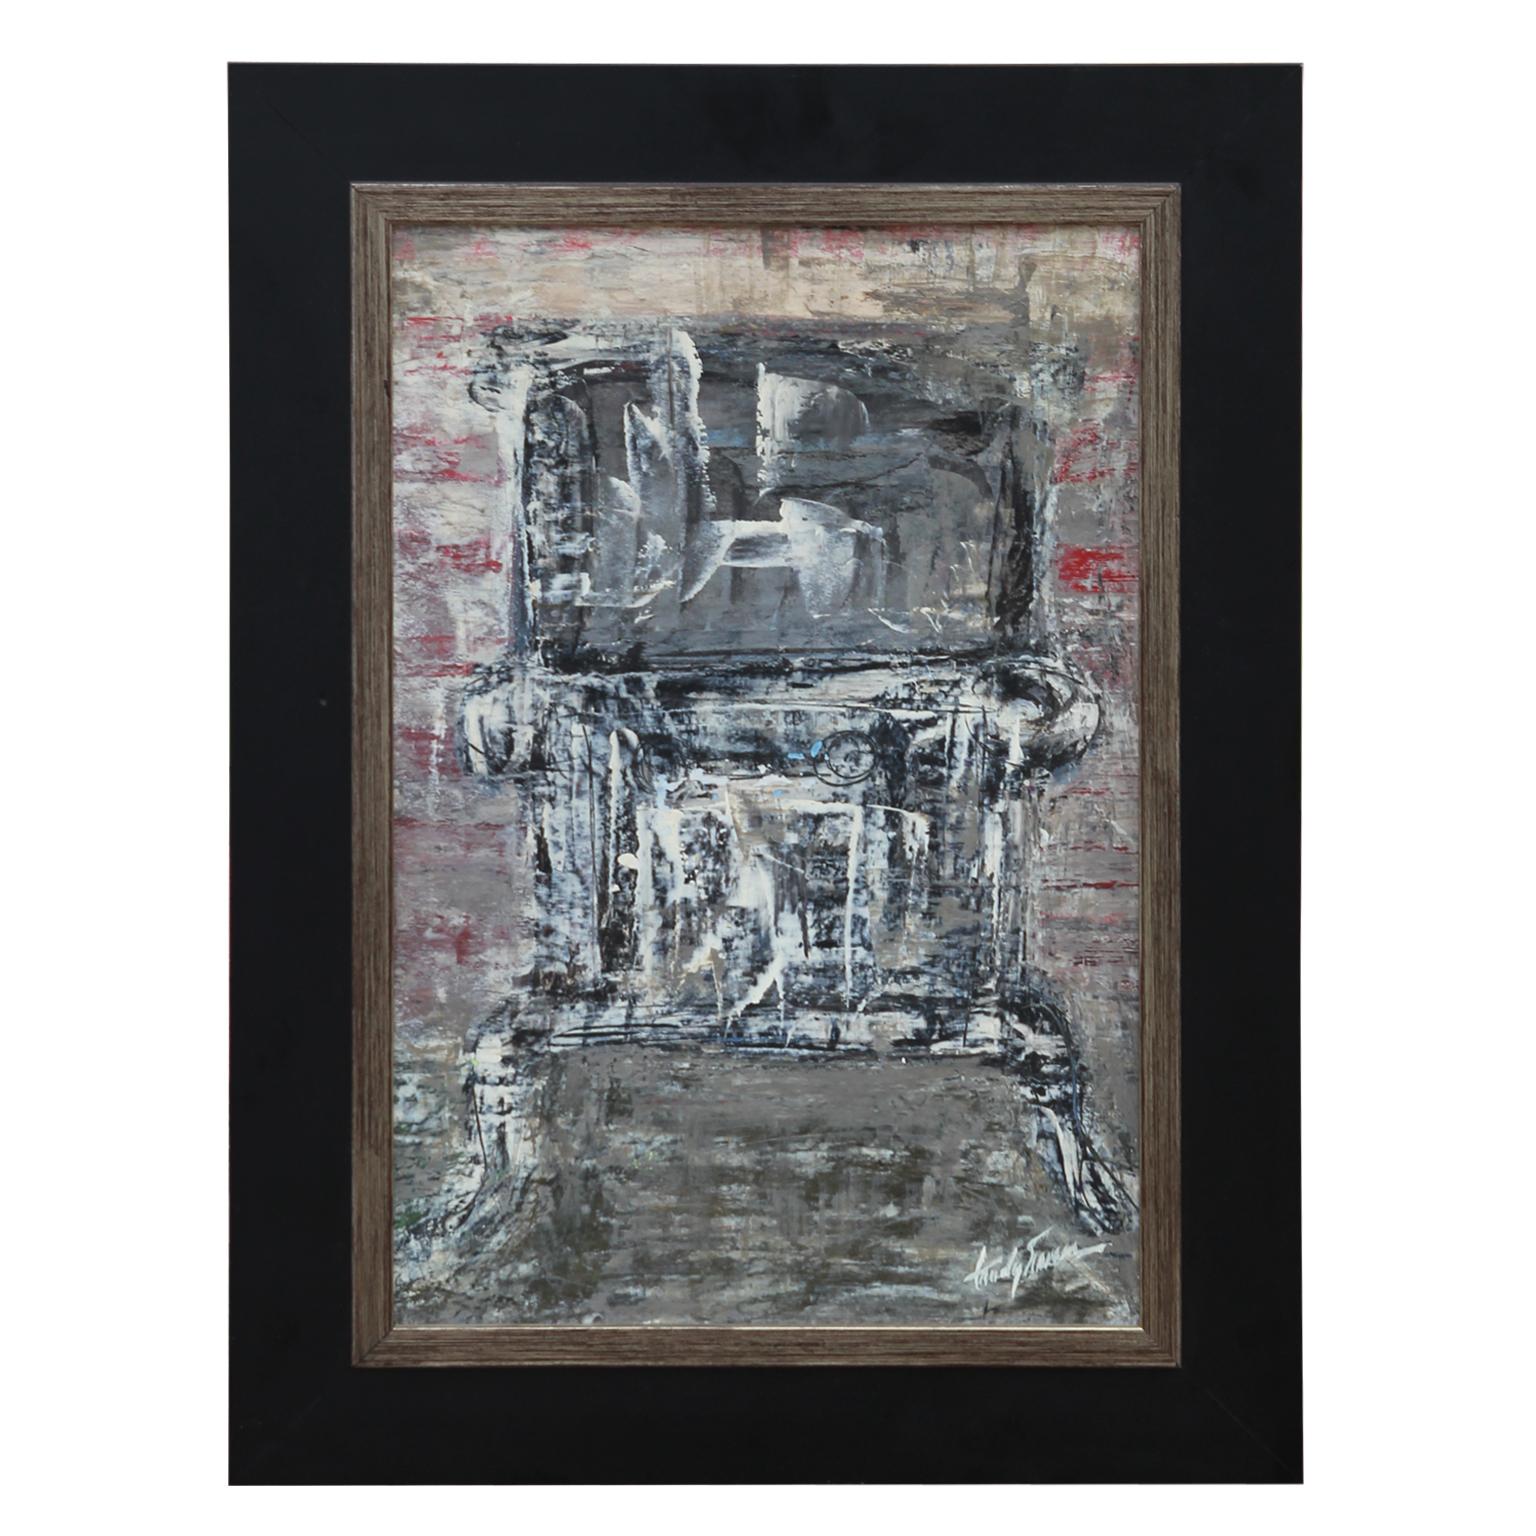 Trudy Sween Abstract Painting - Untitled Black and White Texas Abstract Expressionist Painting